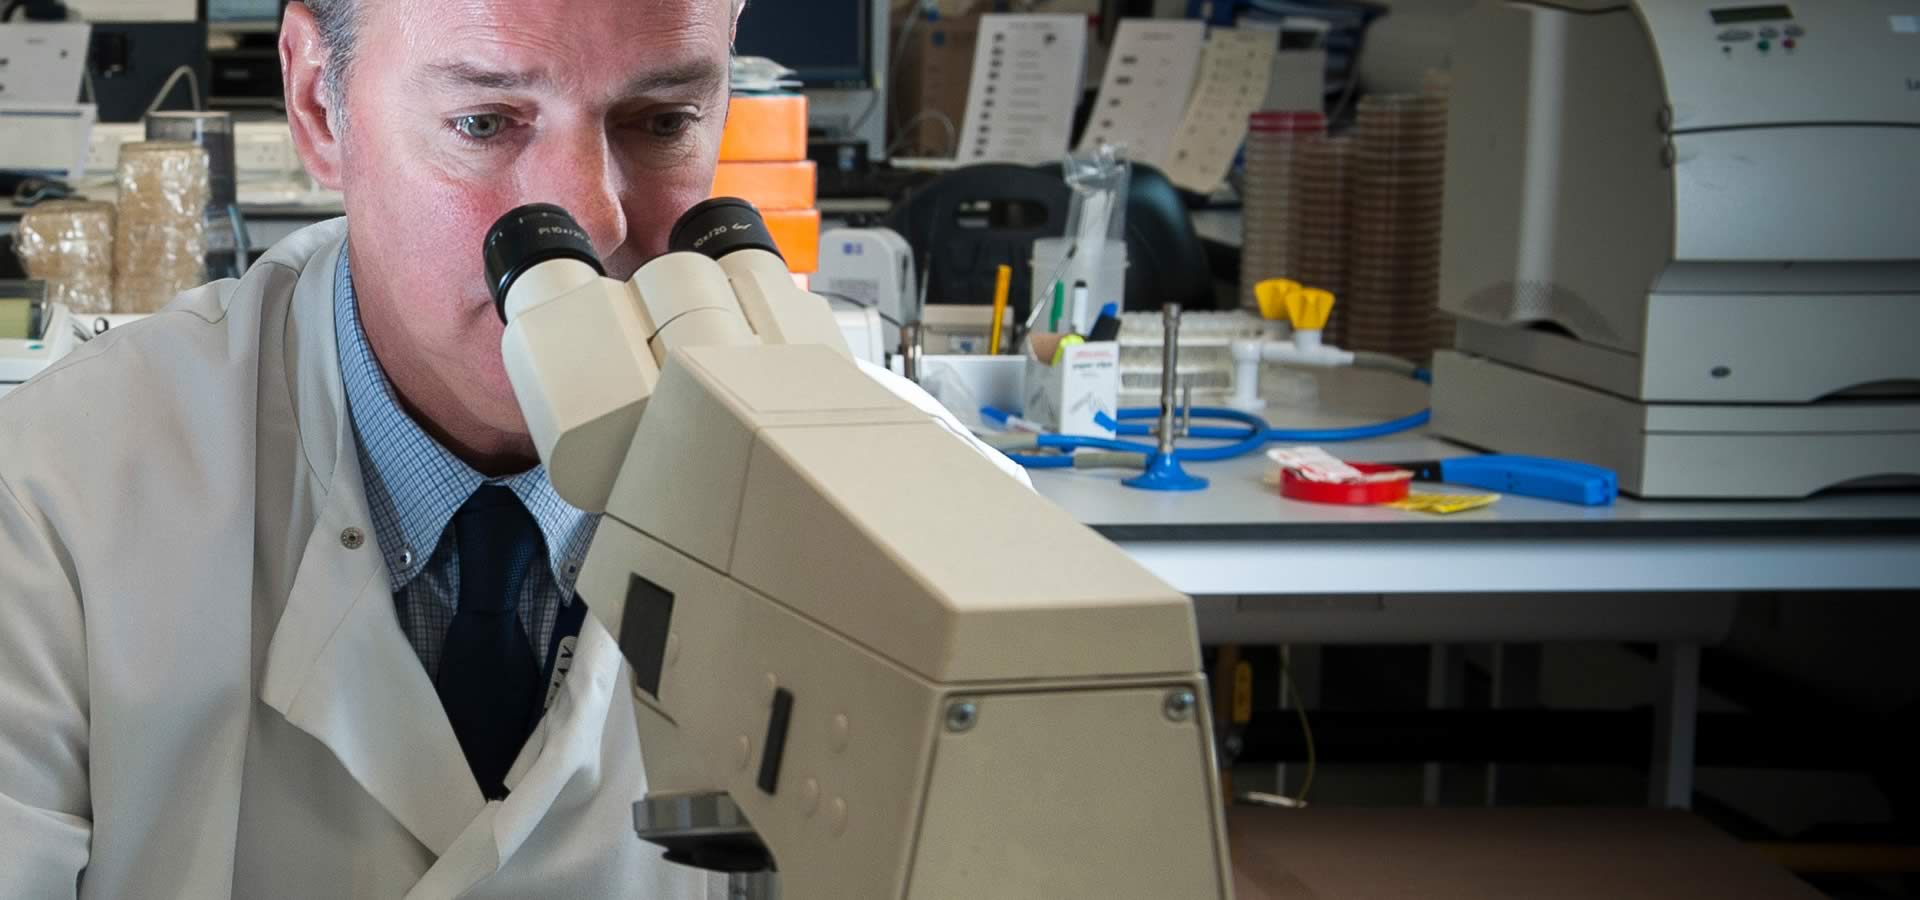 A man in a white coat sitting at a microscope placing a slide under the viewer